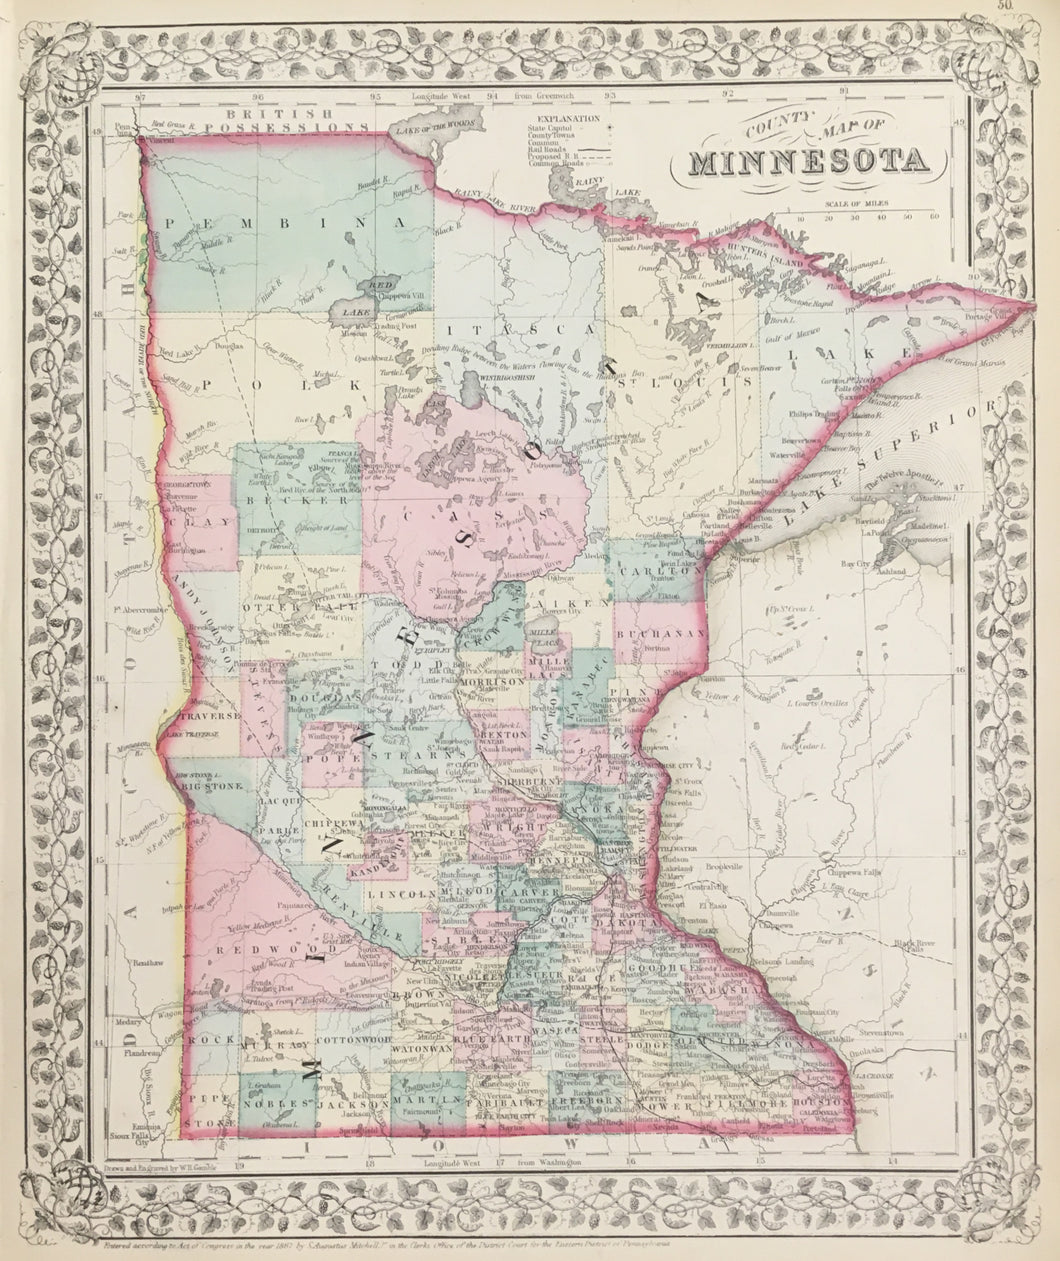 Mitchell, S. Augustus Jr.  “County Map of Minnesota” 1867